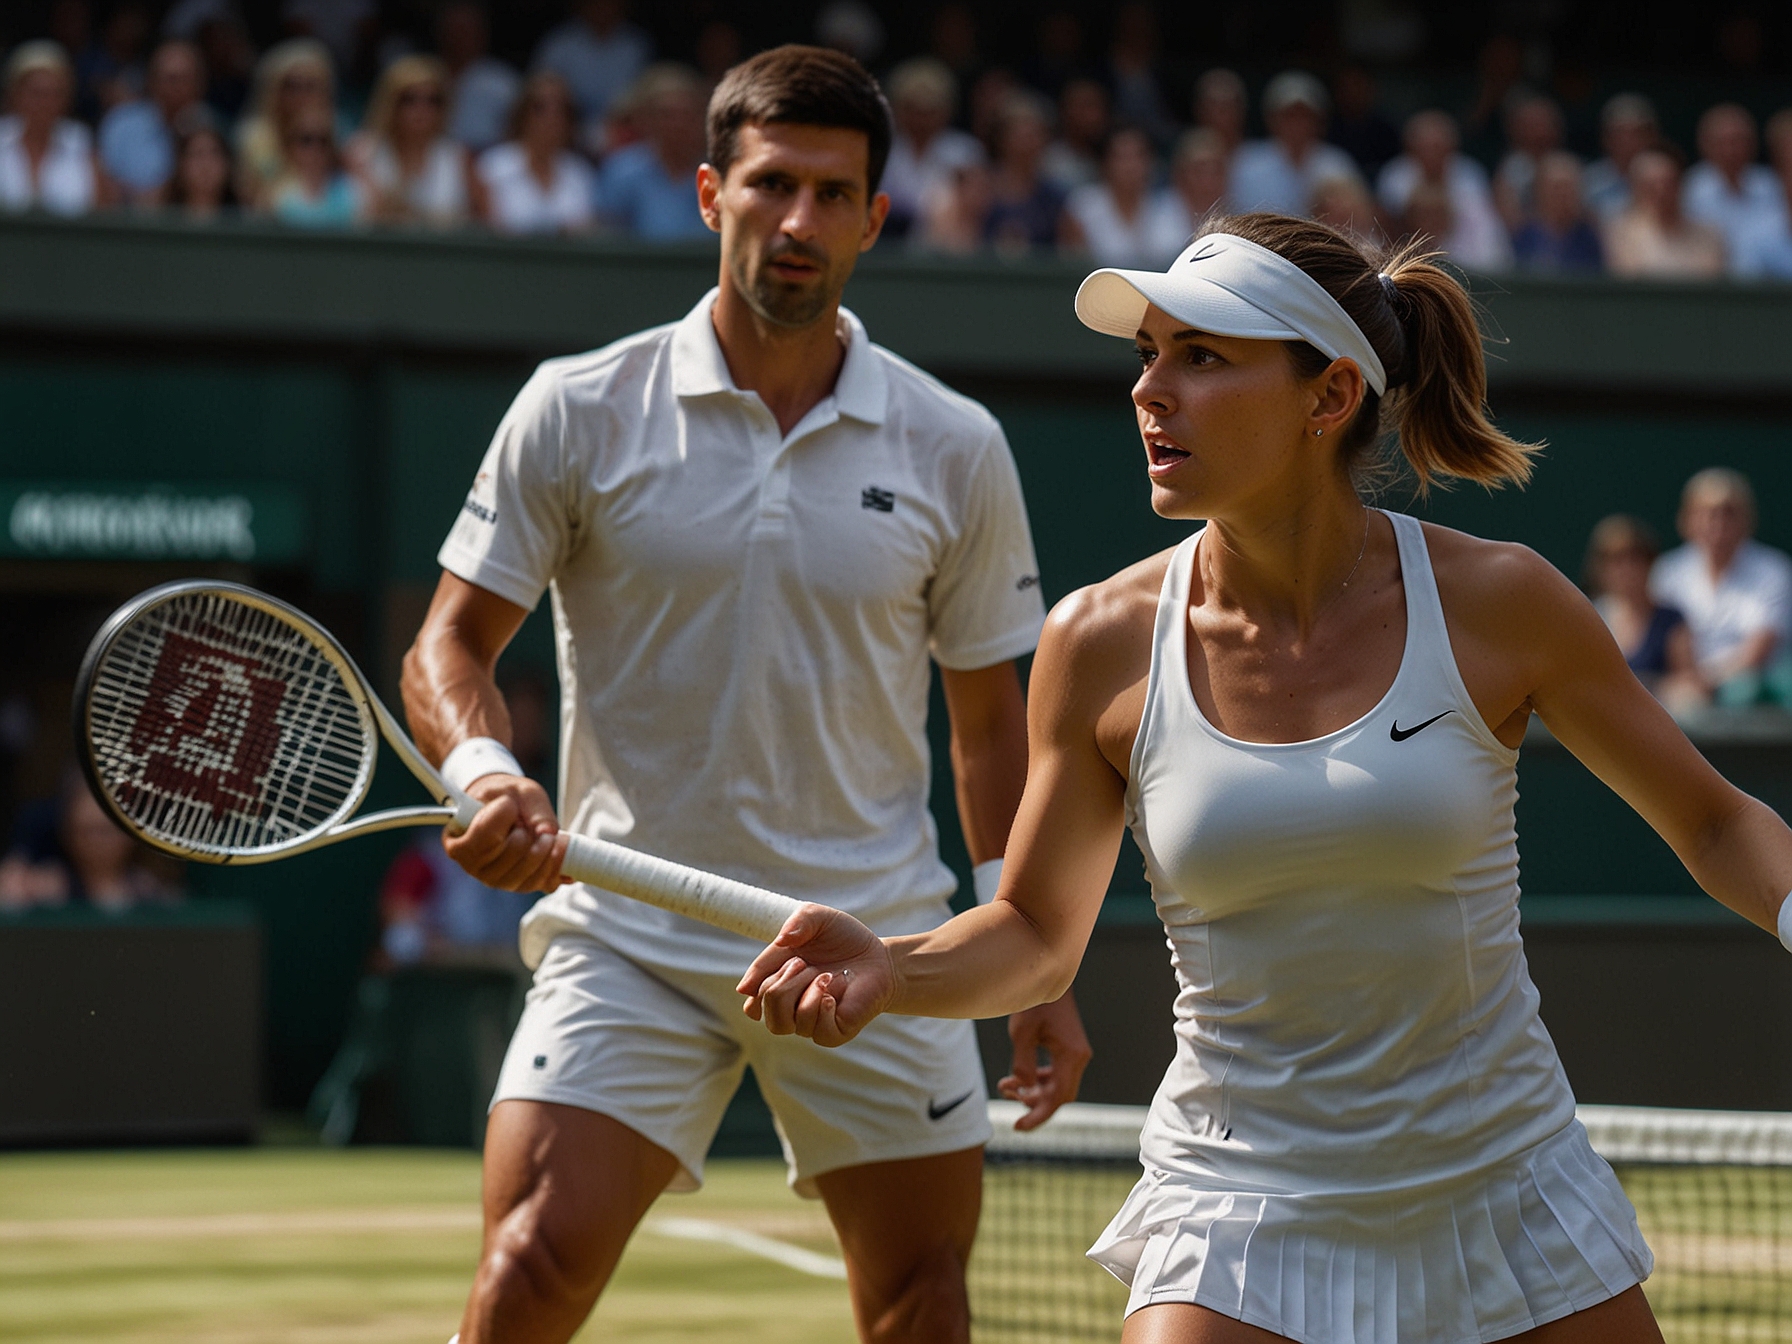 Novak Djokovic and Iga Swiatek focused and in action on the Wimbledon courts, illustrating their dominance and competitive spirit on Day Two of the prestigious tournament.